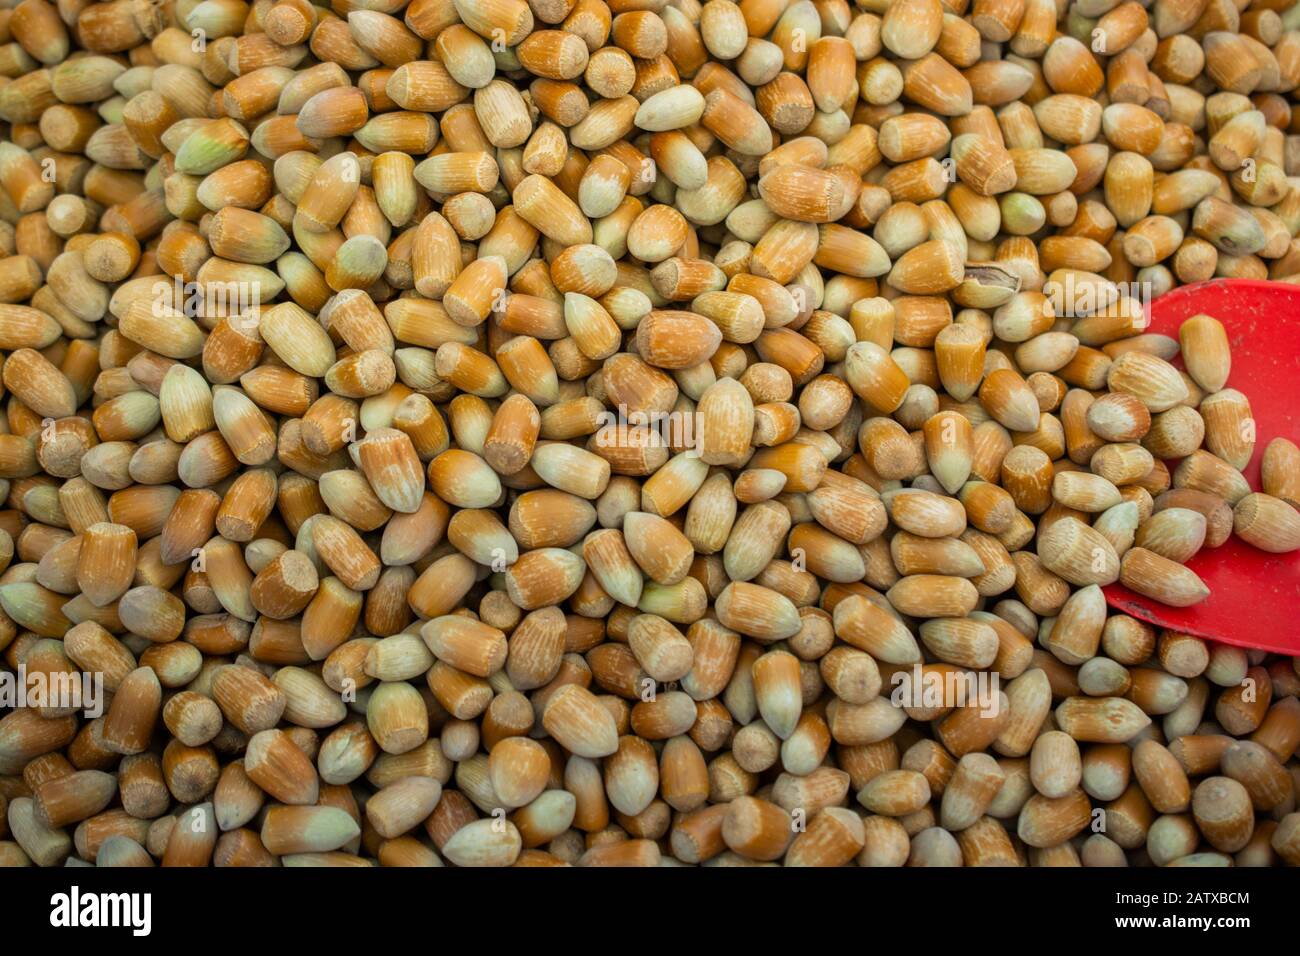 Ripe unshelled hazelnuts  as nut  background in view Stock Photo